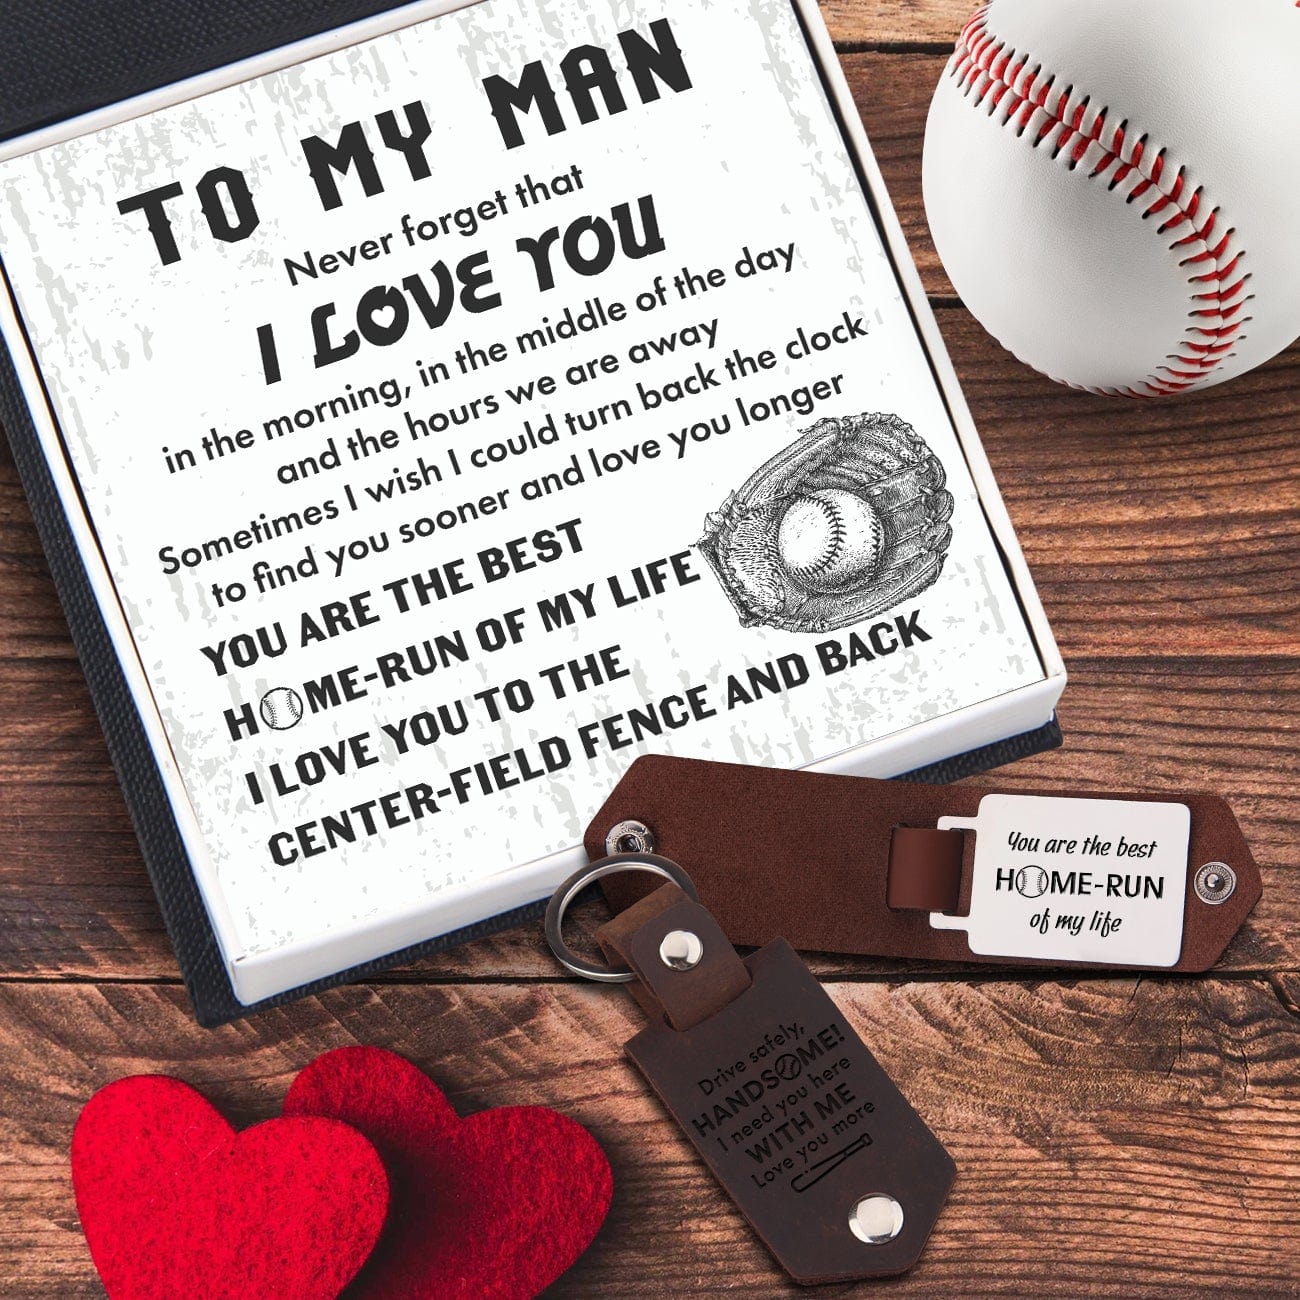 Message Leather Keychain - Baseball - To My Man - Sometimes I Wish I Could Turn Back The Clock - Gkeq26002